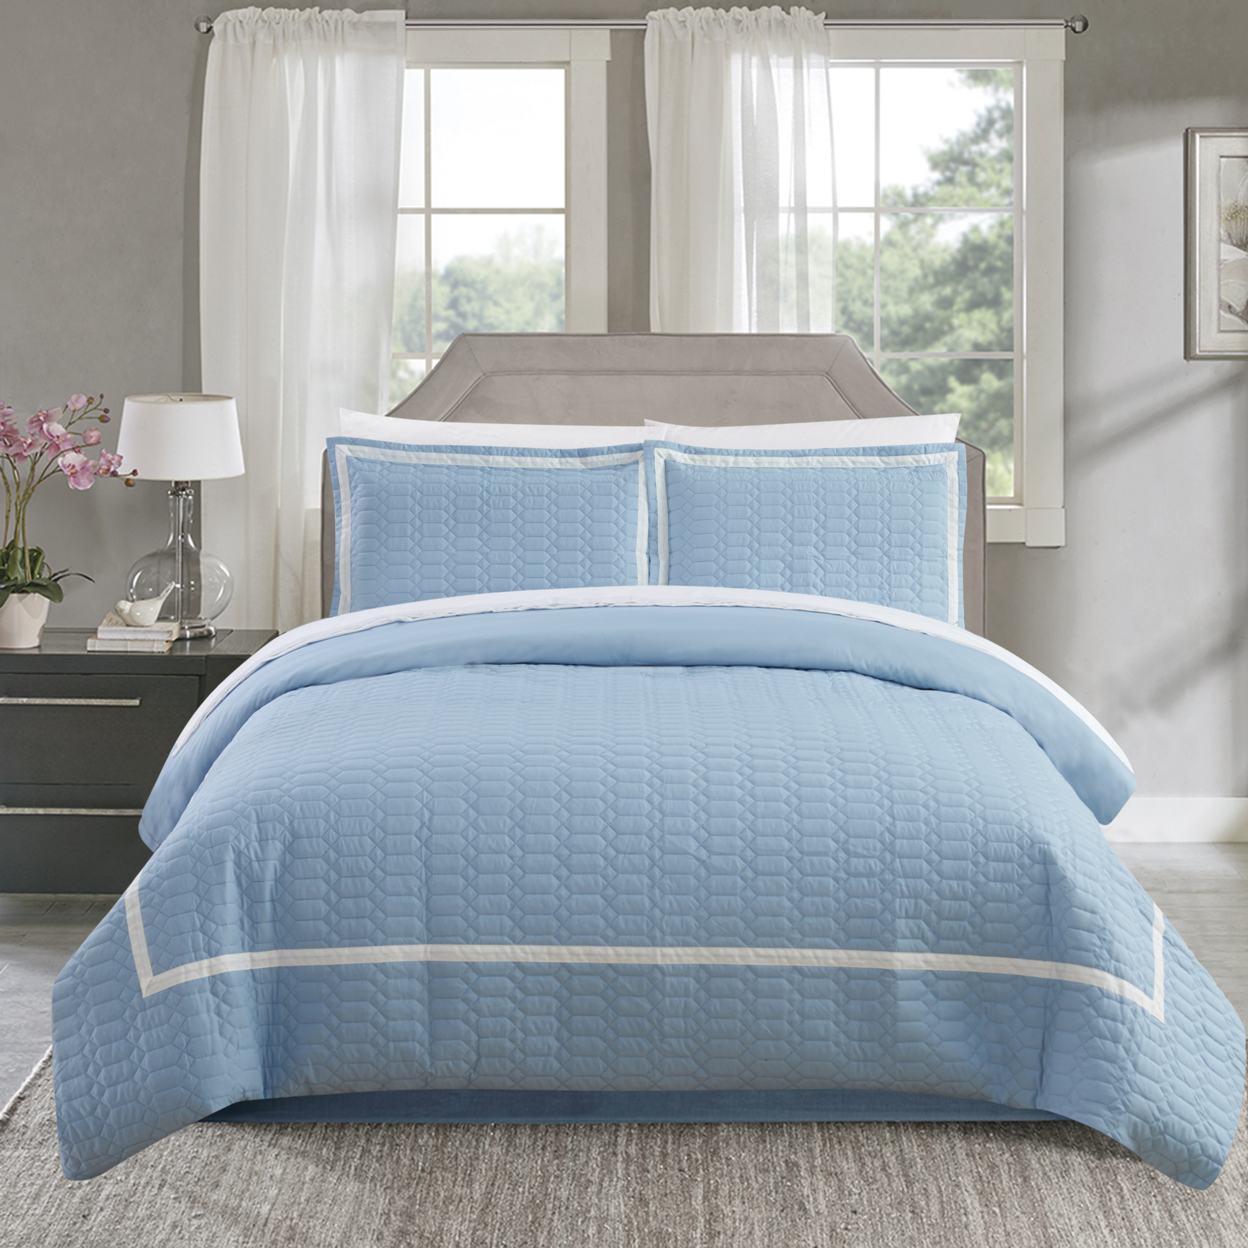 Dawn 2 Piece Duvet Cover Set Hotel Collection Two Tone Banded Print Zipper Closure - Blue, Queen